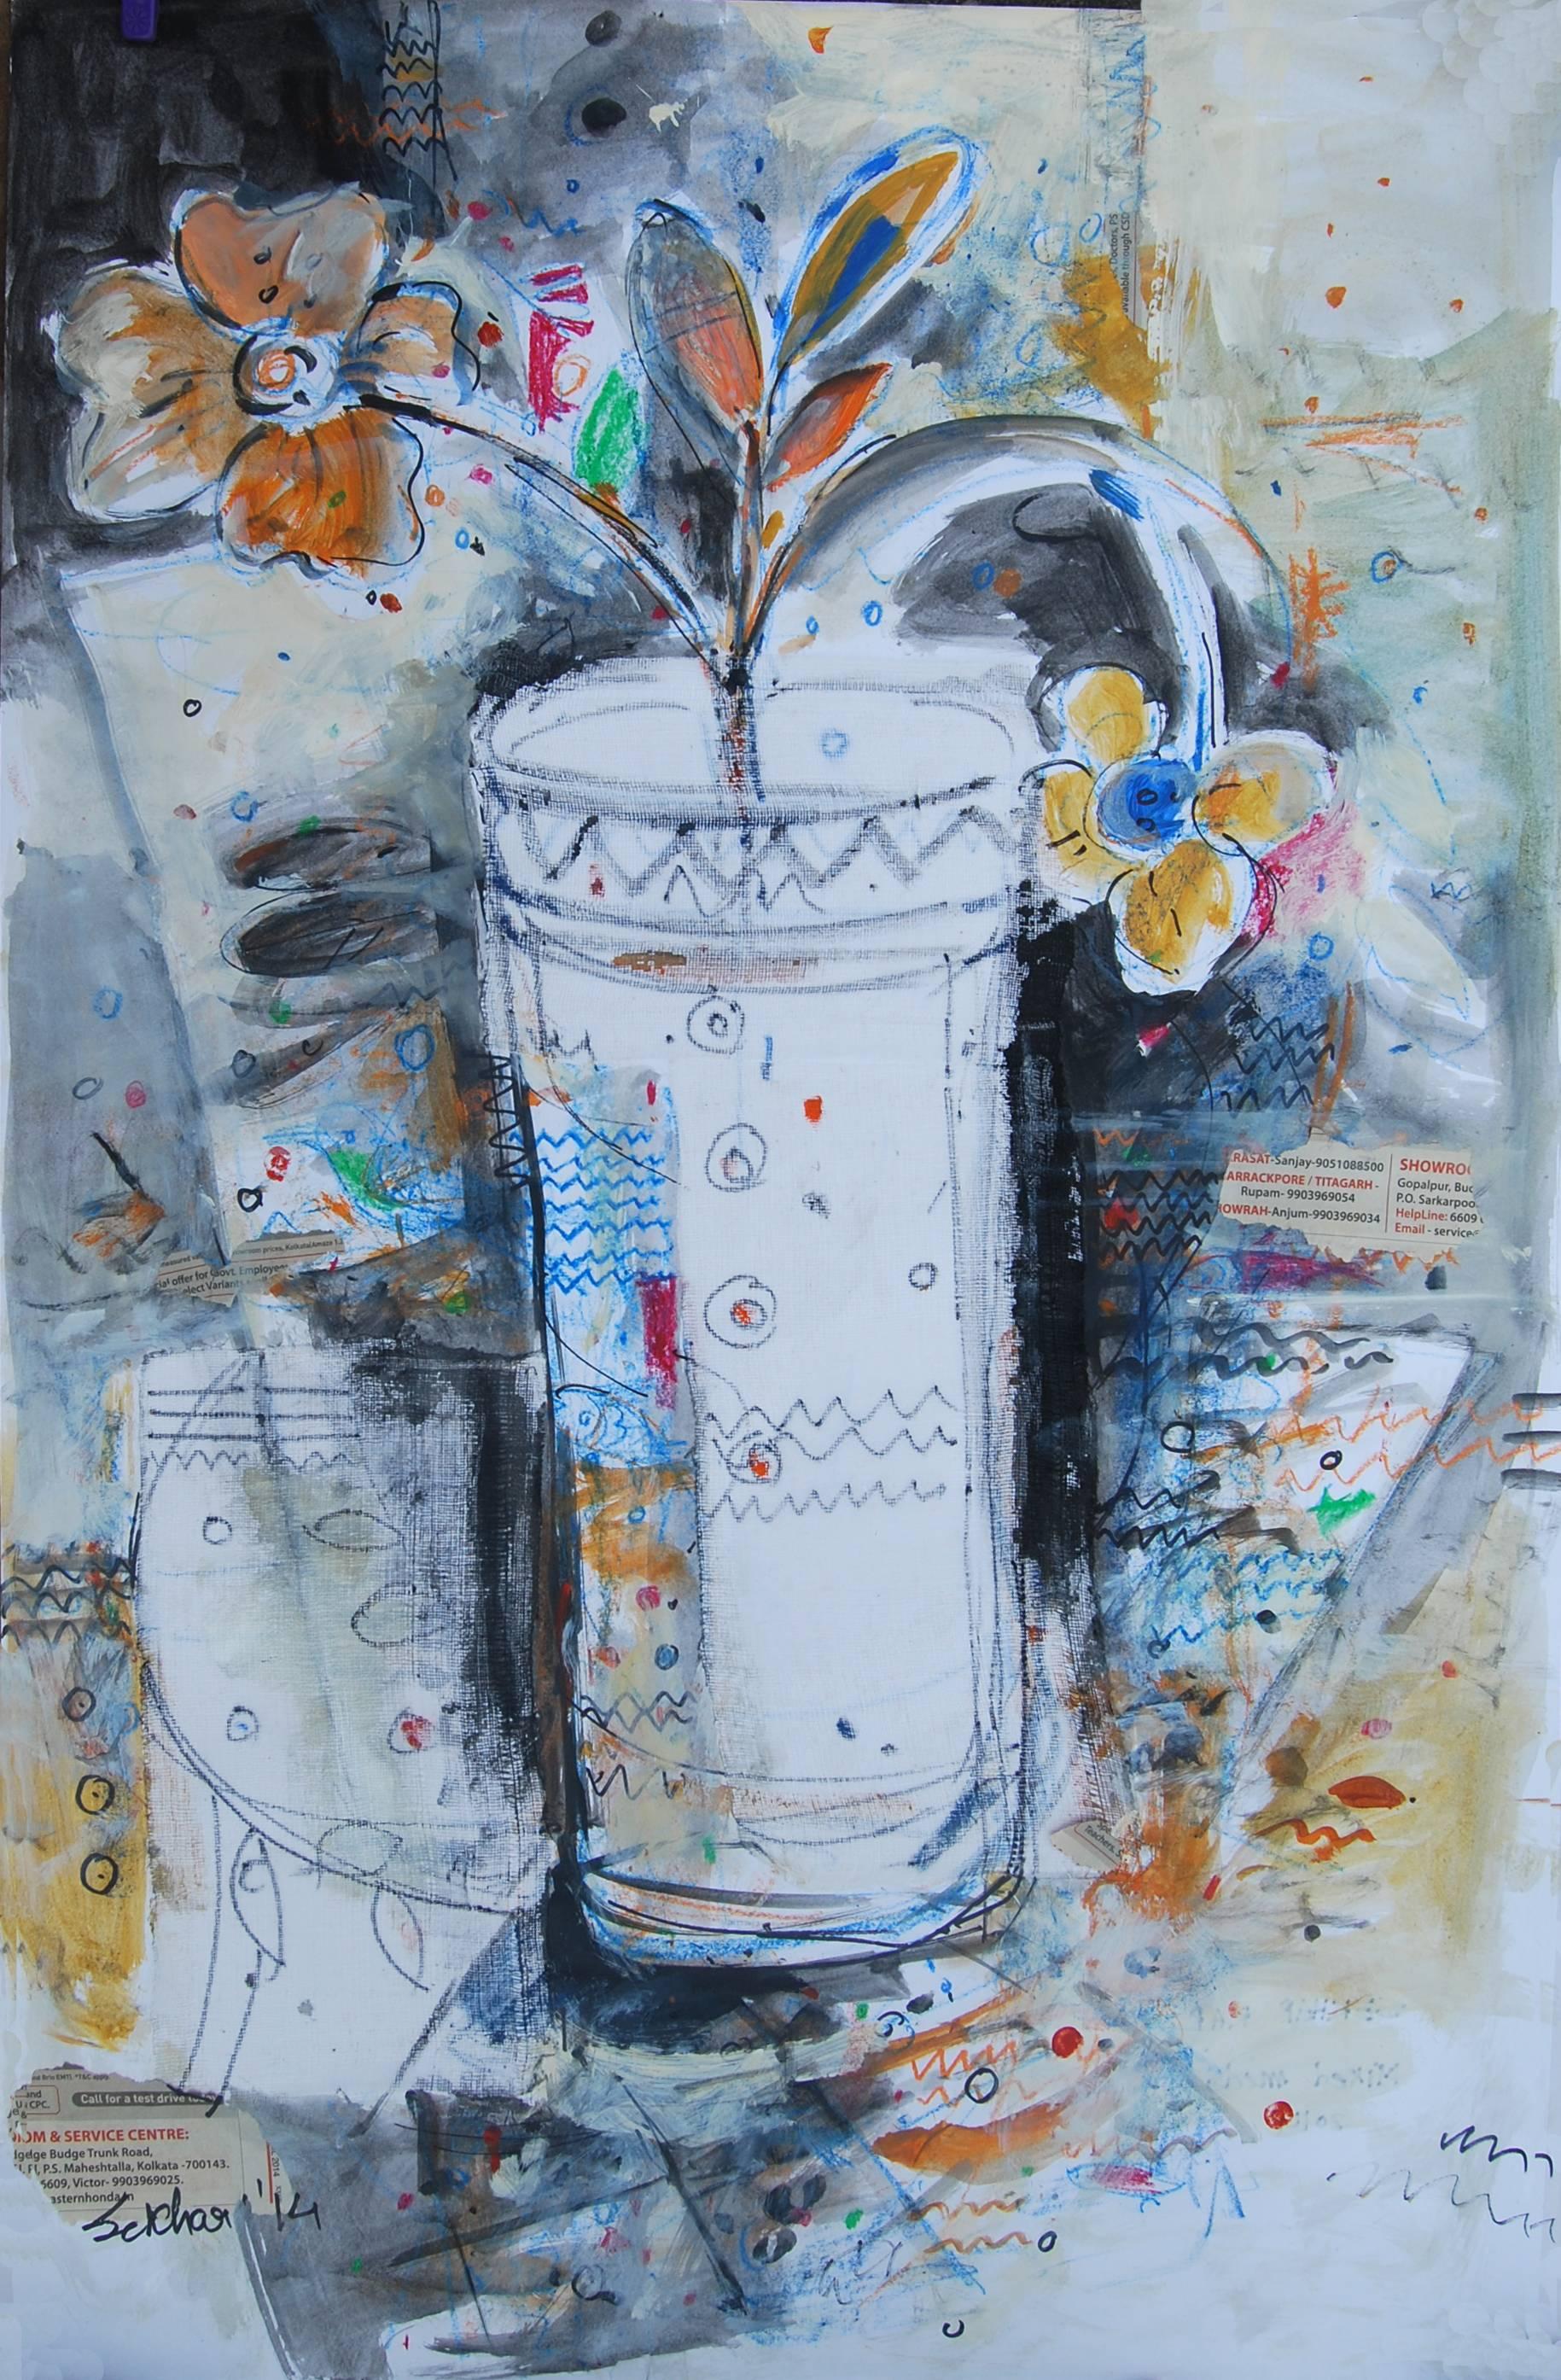 Flower Vase, Mixed Media on paper, Blue, Red, Black by Indian Artist 